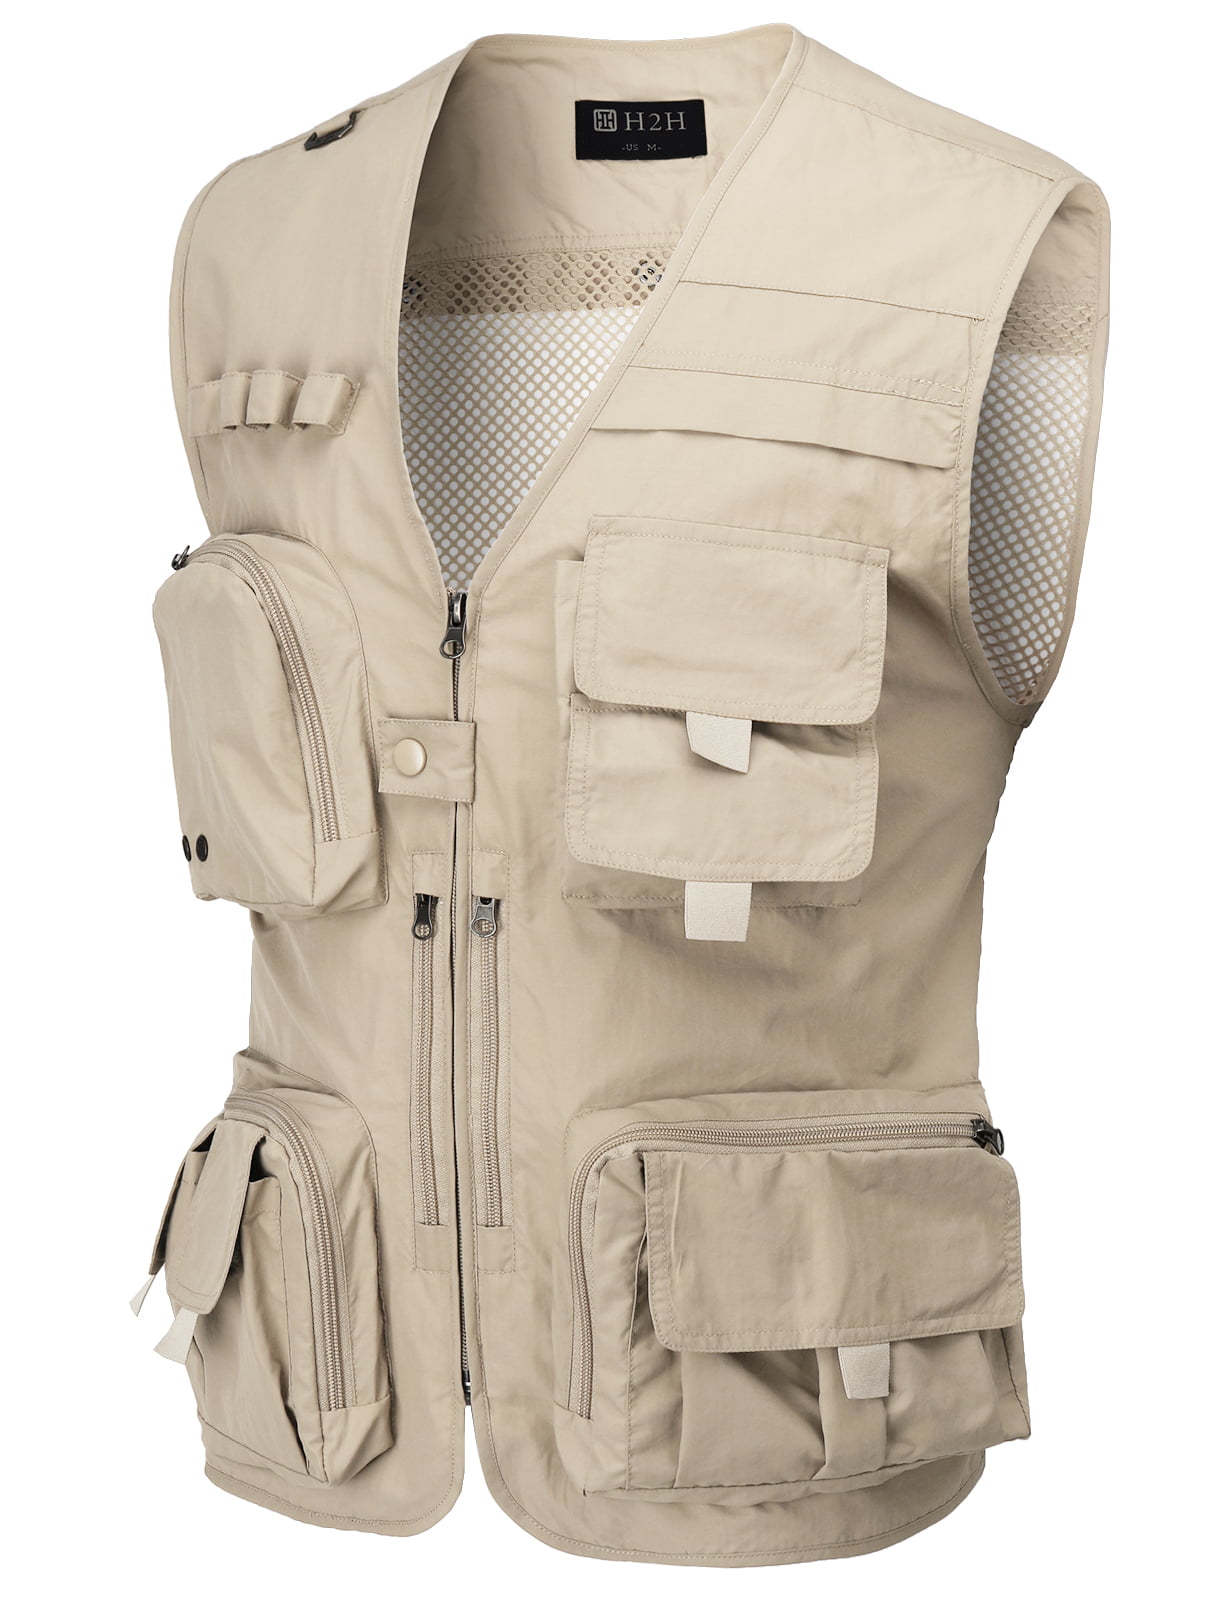 Details about   SPG Function Men's Outdoor Work Multi-Function Pockets Fishing  Vest 2XL 